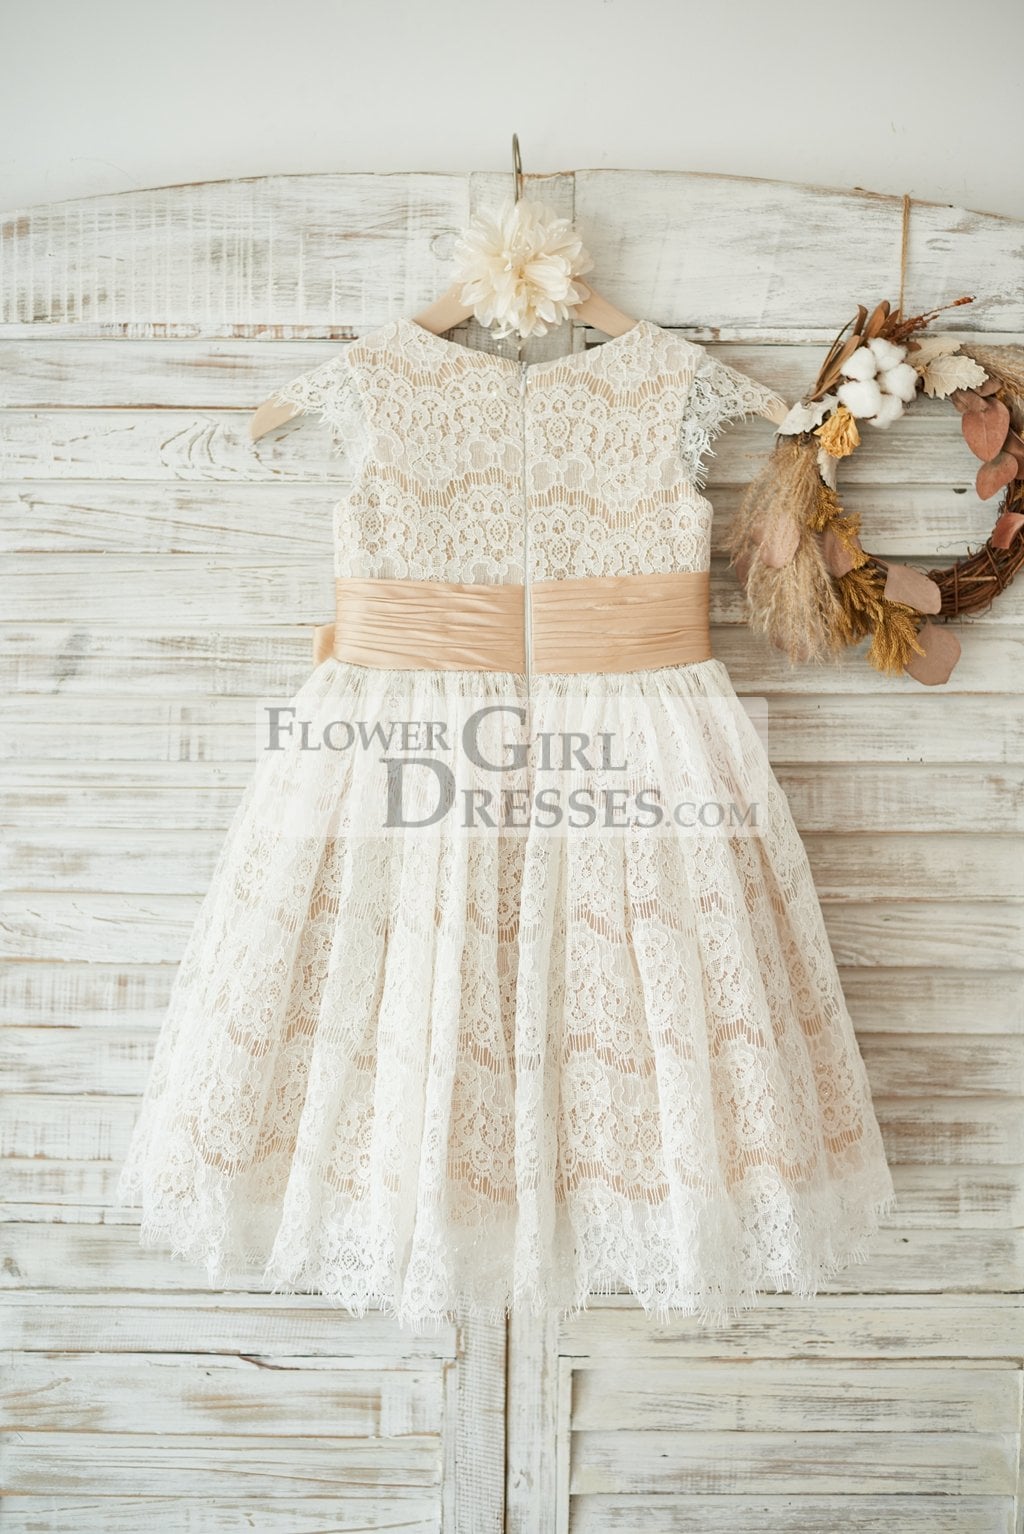 Champagne Satin Ivory Lace Cap Sleeves Wedding Flower Girl Dress with Bow Belt